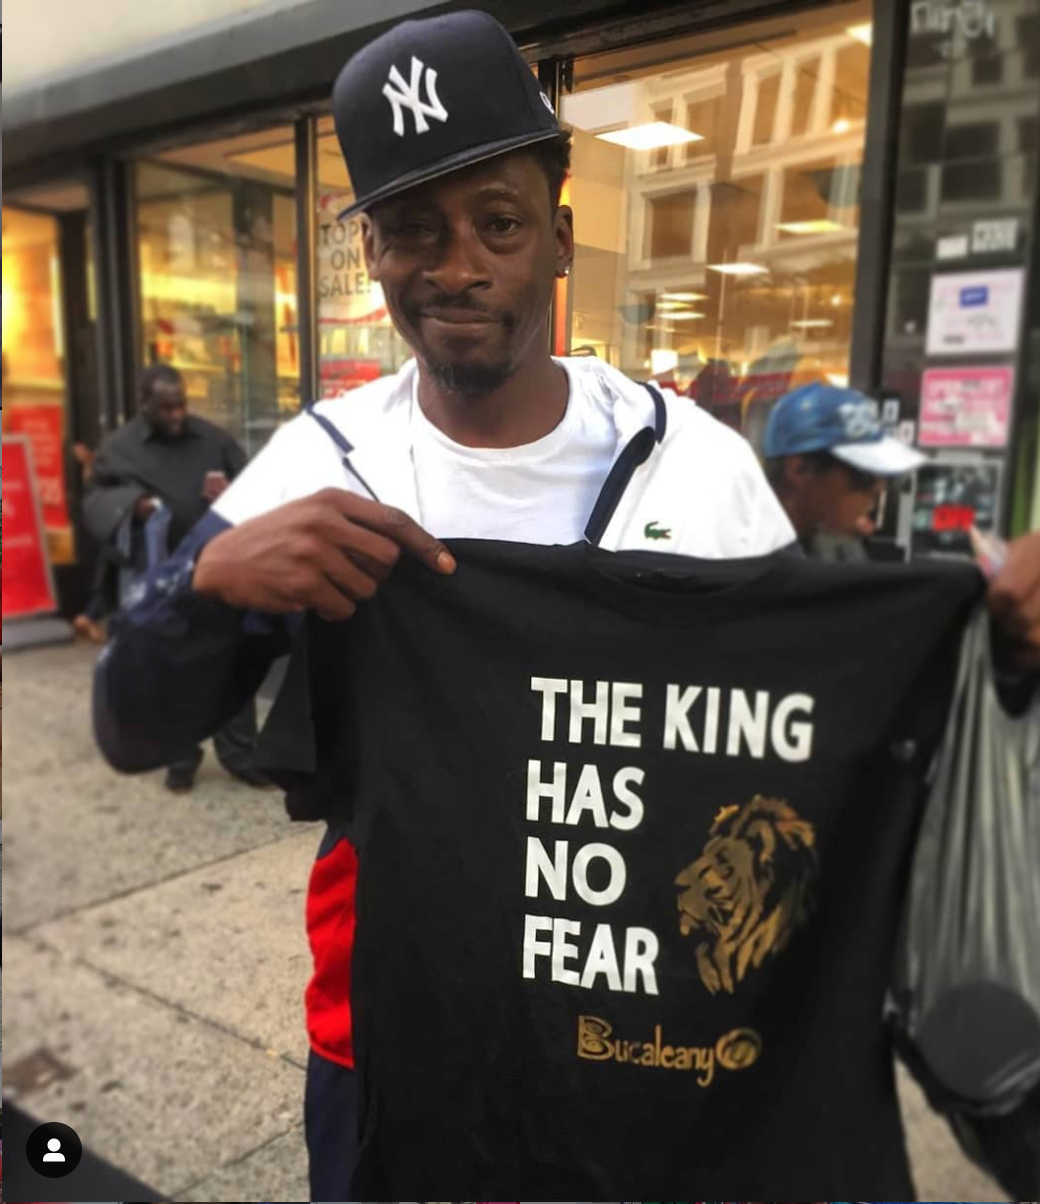 Hip Hop Legend Pete Rock love supporting Harlem's #1 Brand Bucaleany